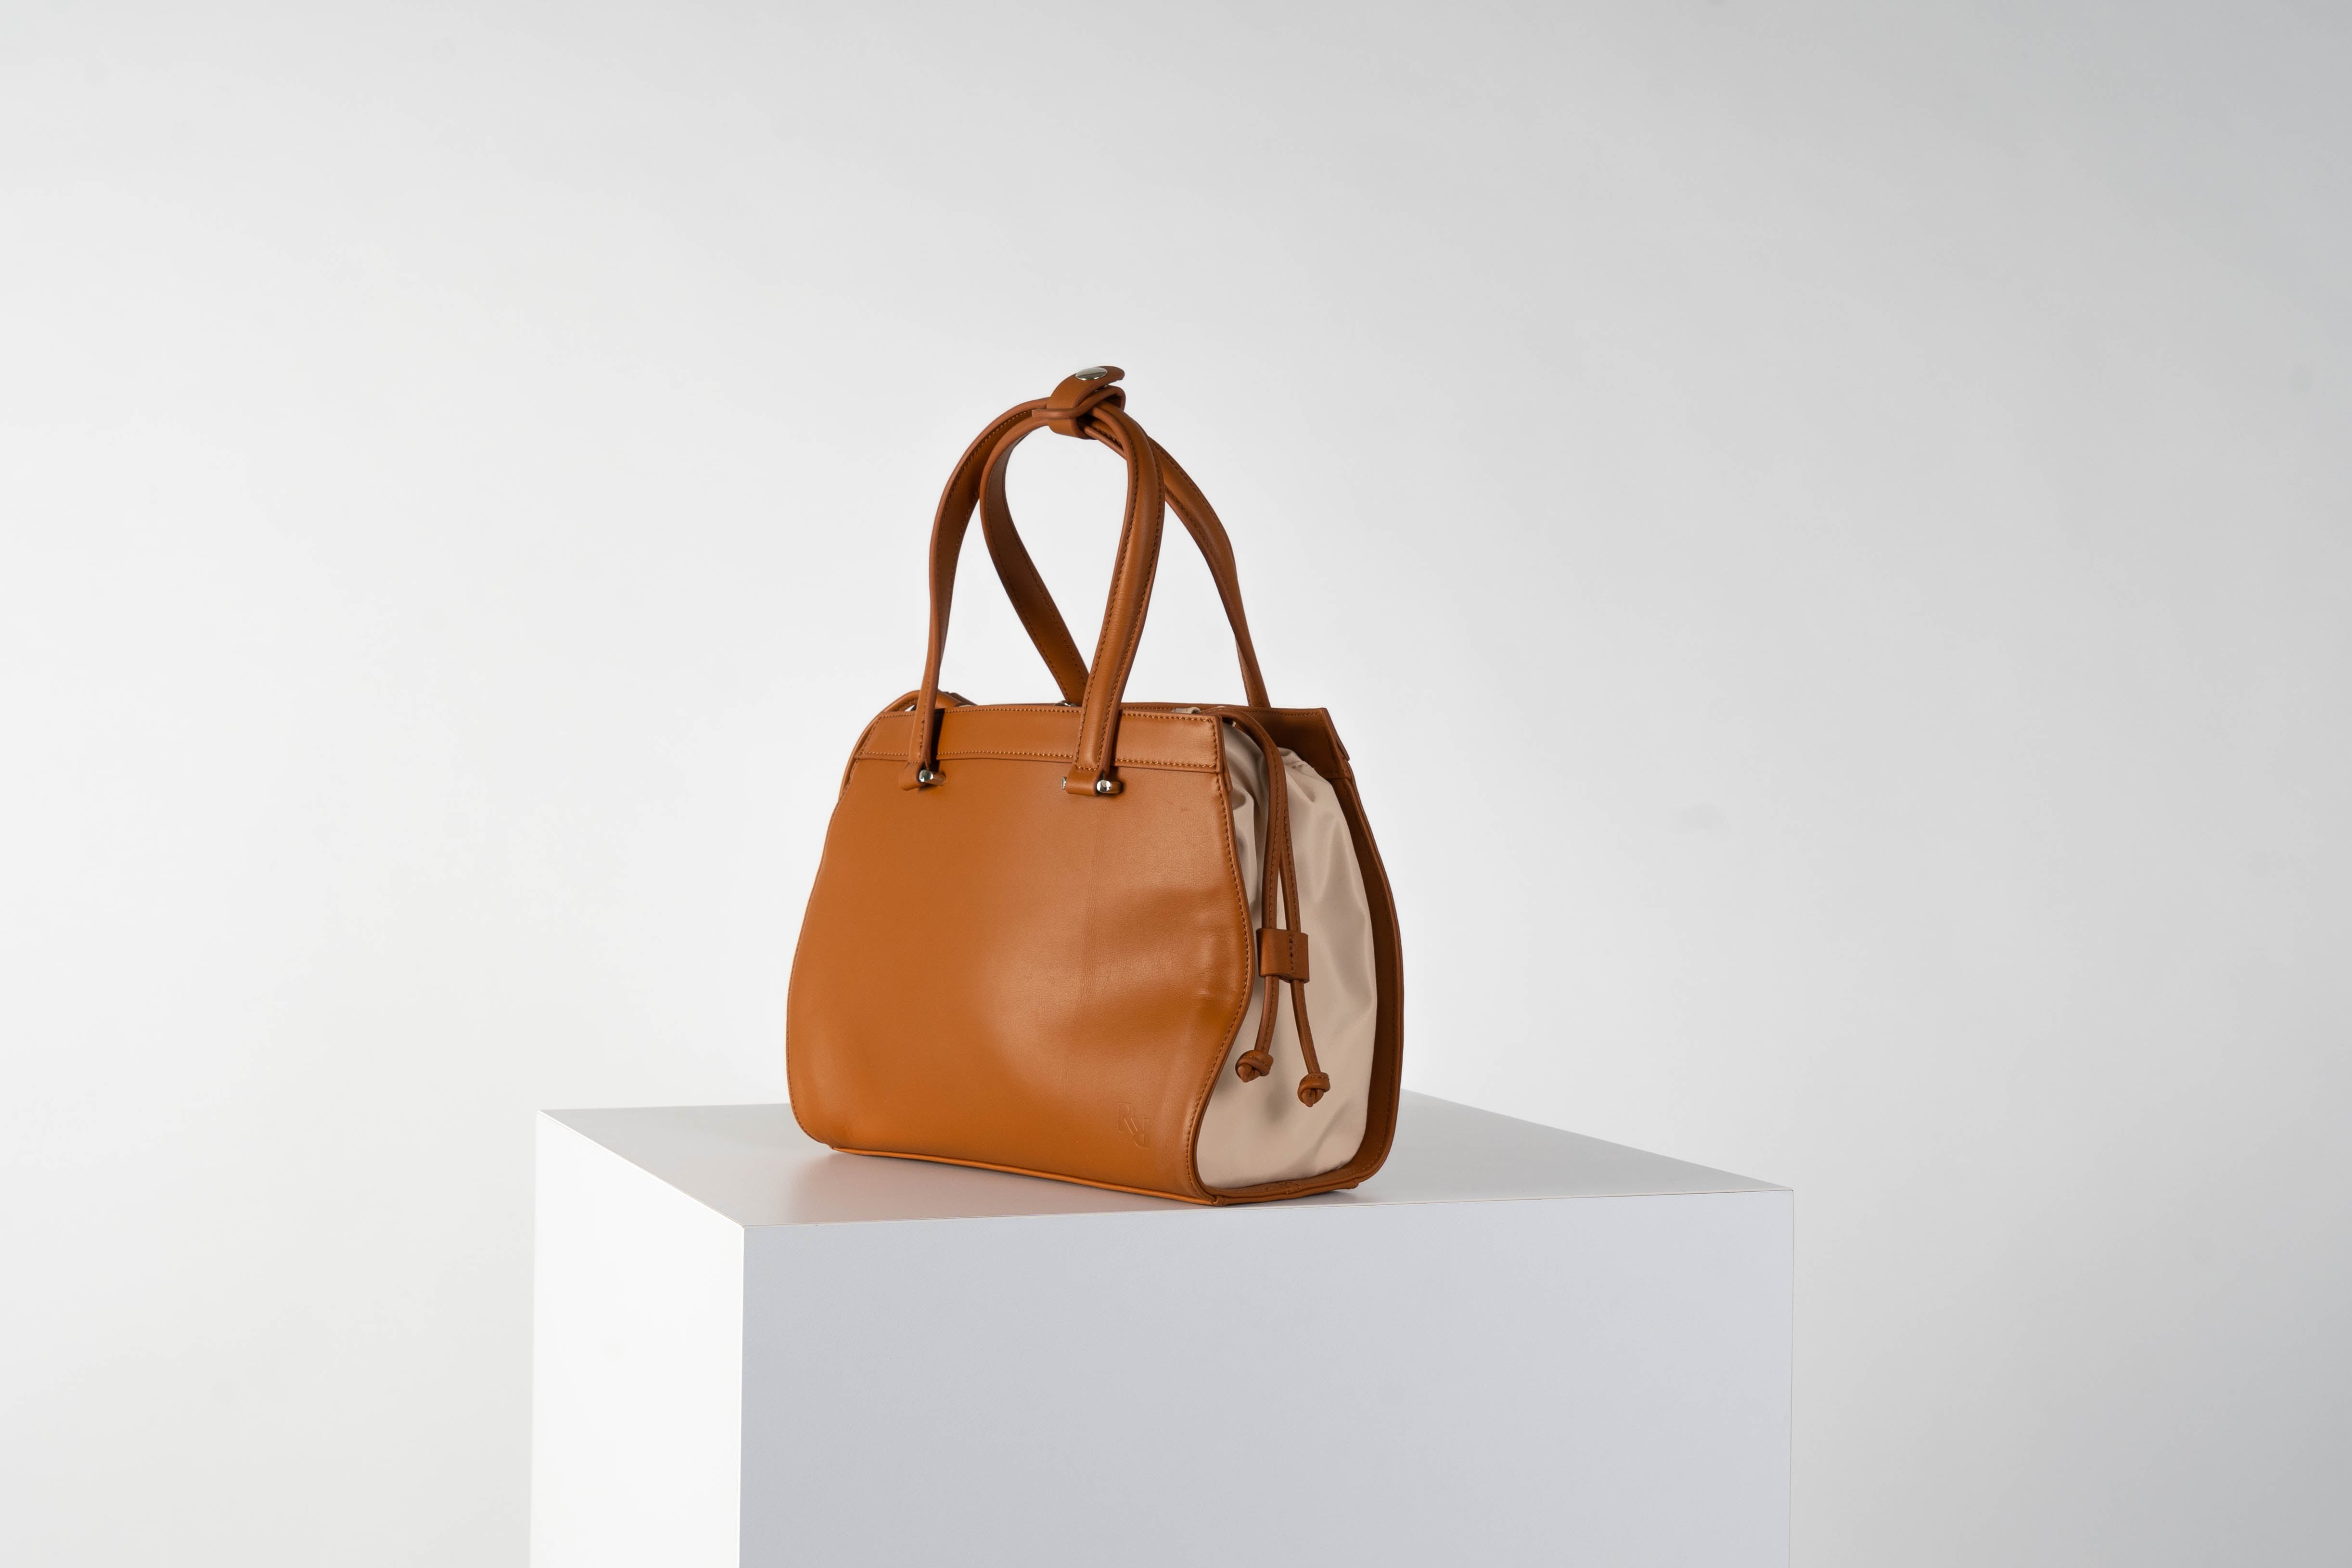 Supple Leather Gusset Bag in Tan with Beige Gusset